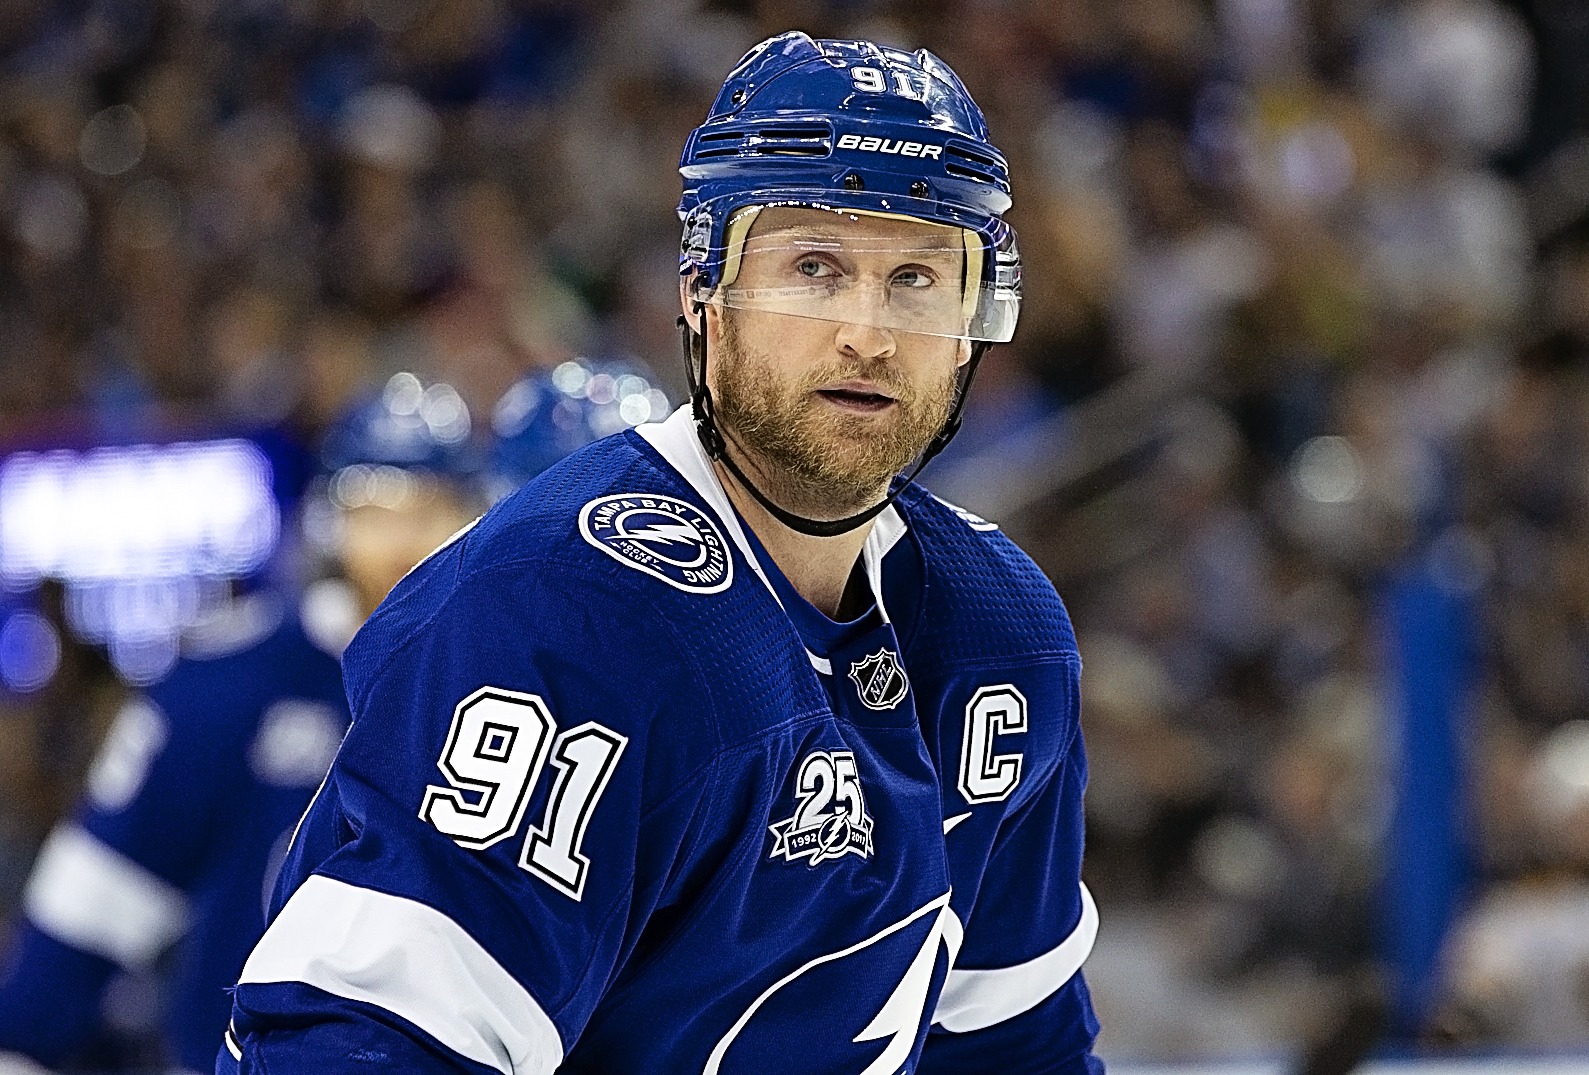 Stamkos needs to assume the leadership role for Bolts./CARMEN MANDATO